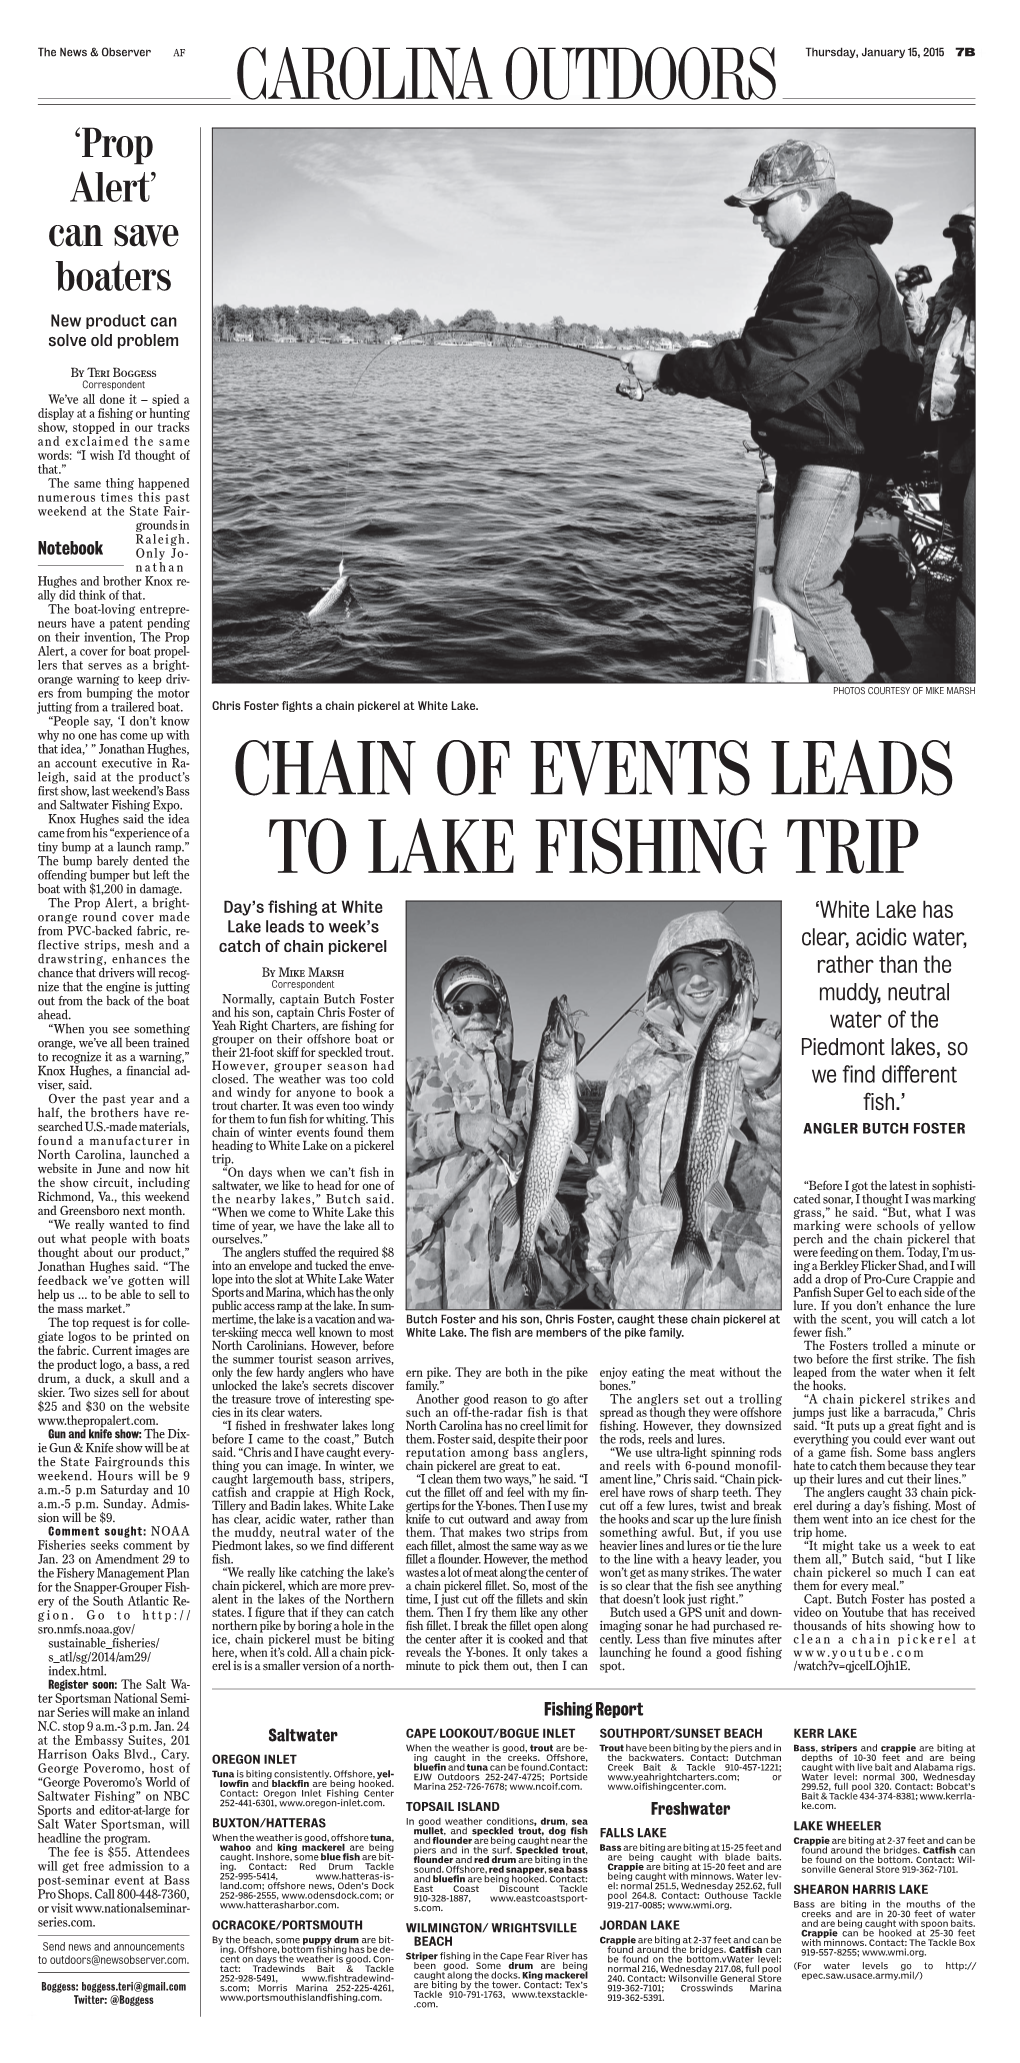 Chain of Events Leads to Lake Fishing Trip